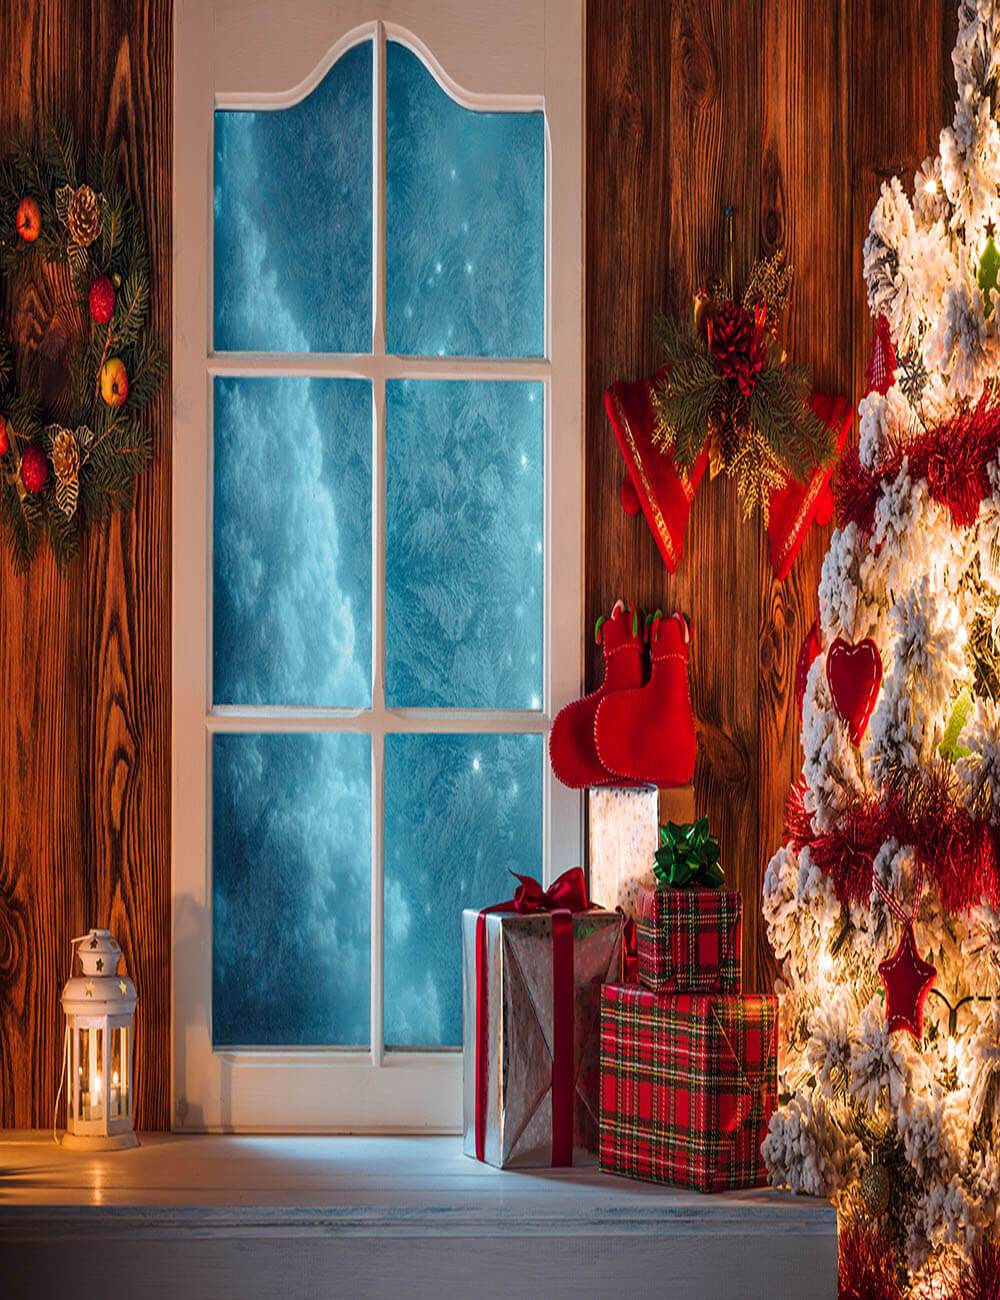 Wooden Room With Window For Christmas Photography Backdrop J-0799 Shopbackdrop